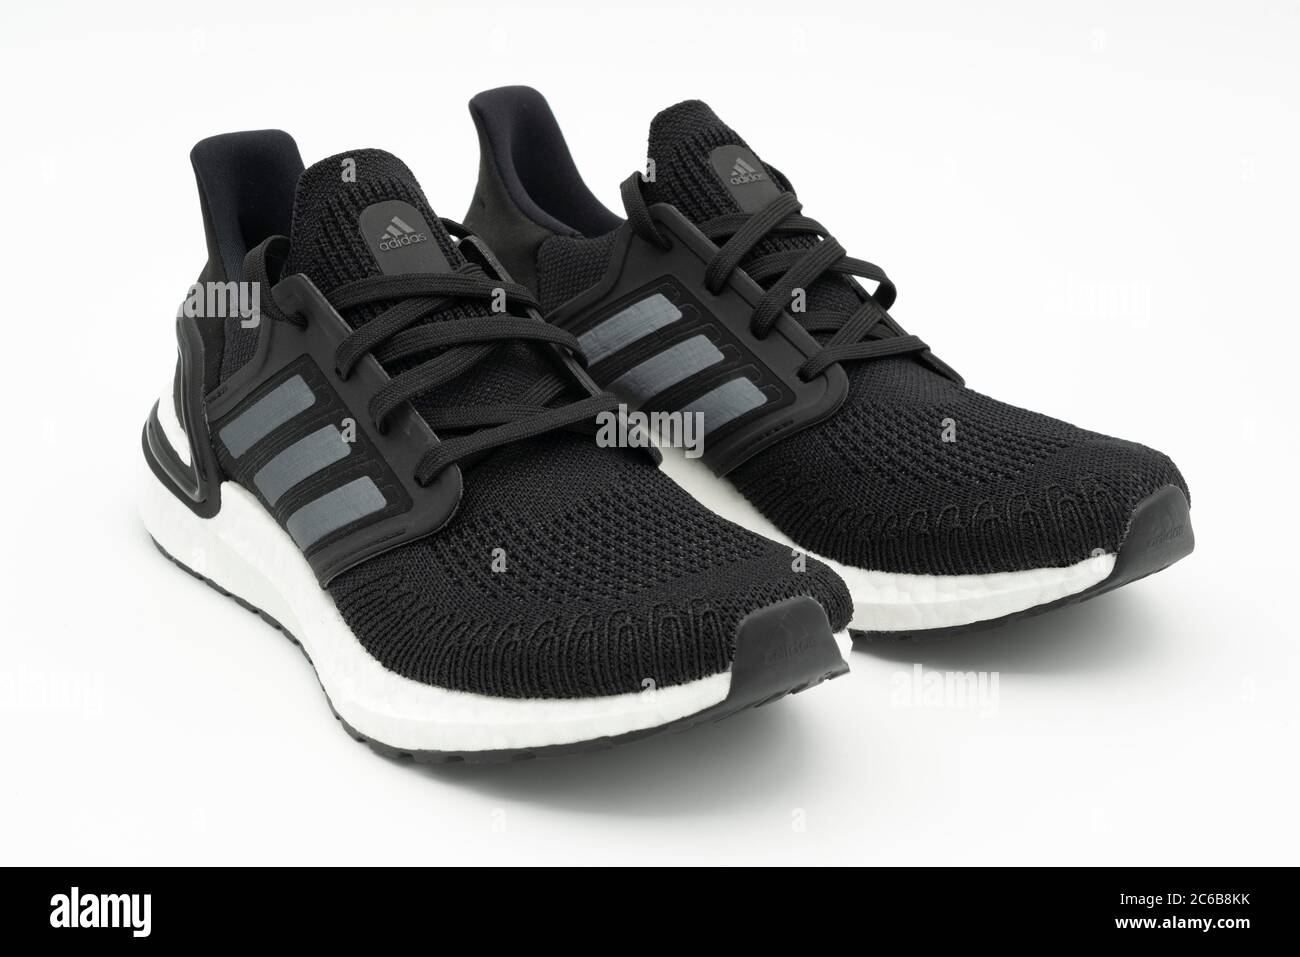 Pair Of Black Adidas Ultraboost Running Shoes Cut Out Isolated On White Background Stock Photo Alamy